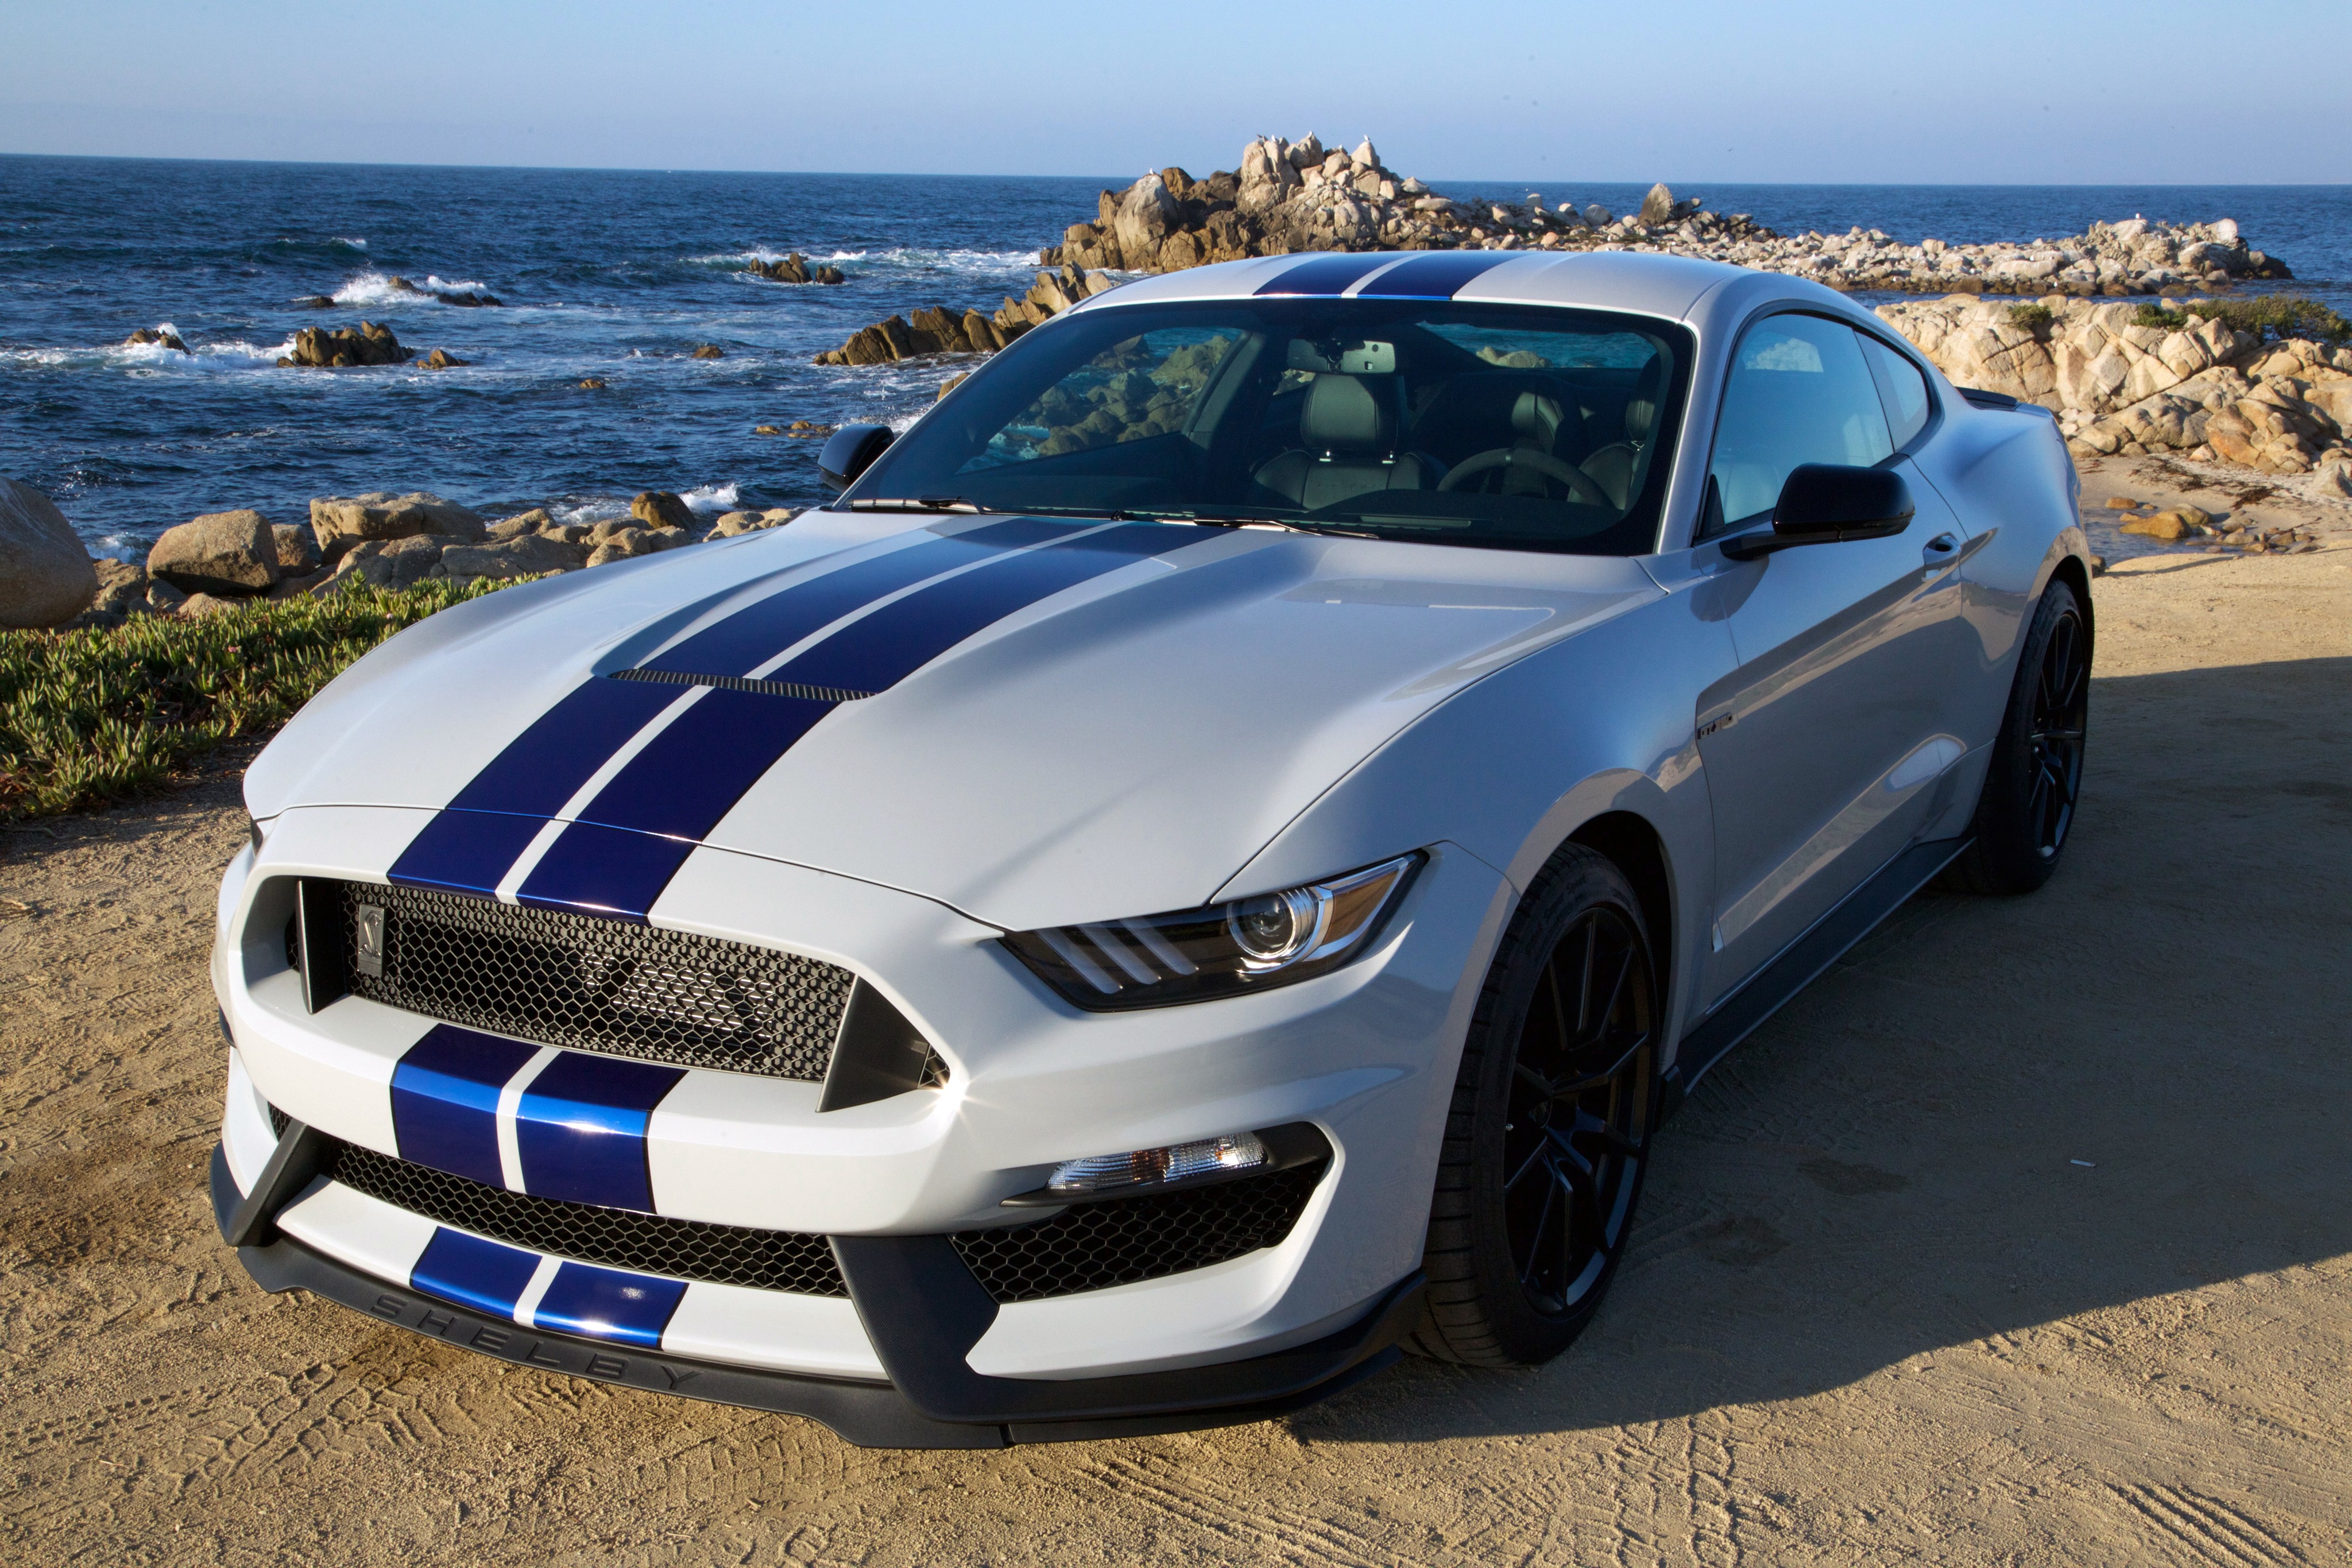 Ford Mustang Shelby, Muscle Cars, American Cars, White Cars, Pony, Shelby GT500, Shelby, Shelby GT350 Wallpaper